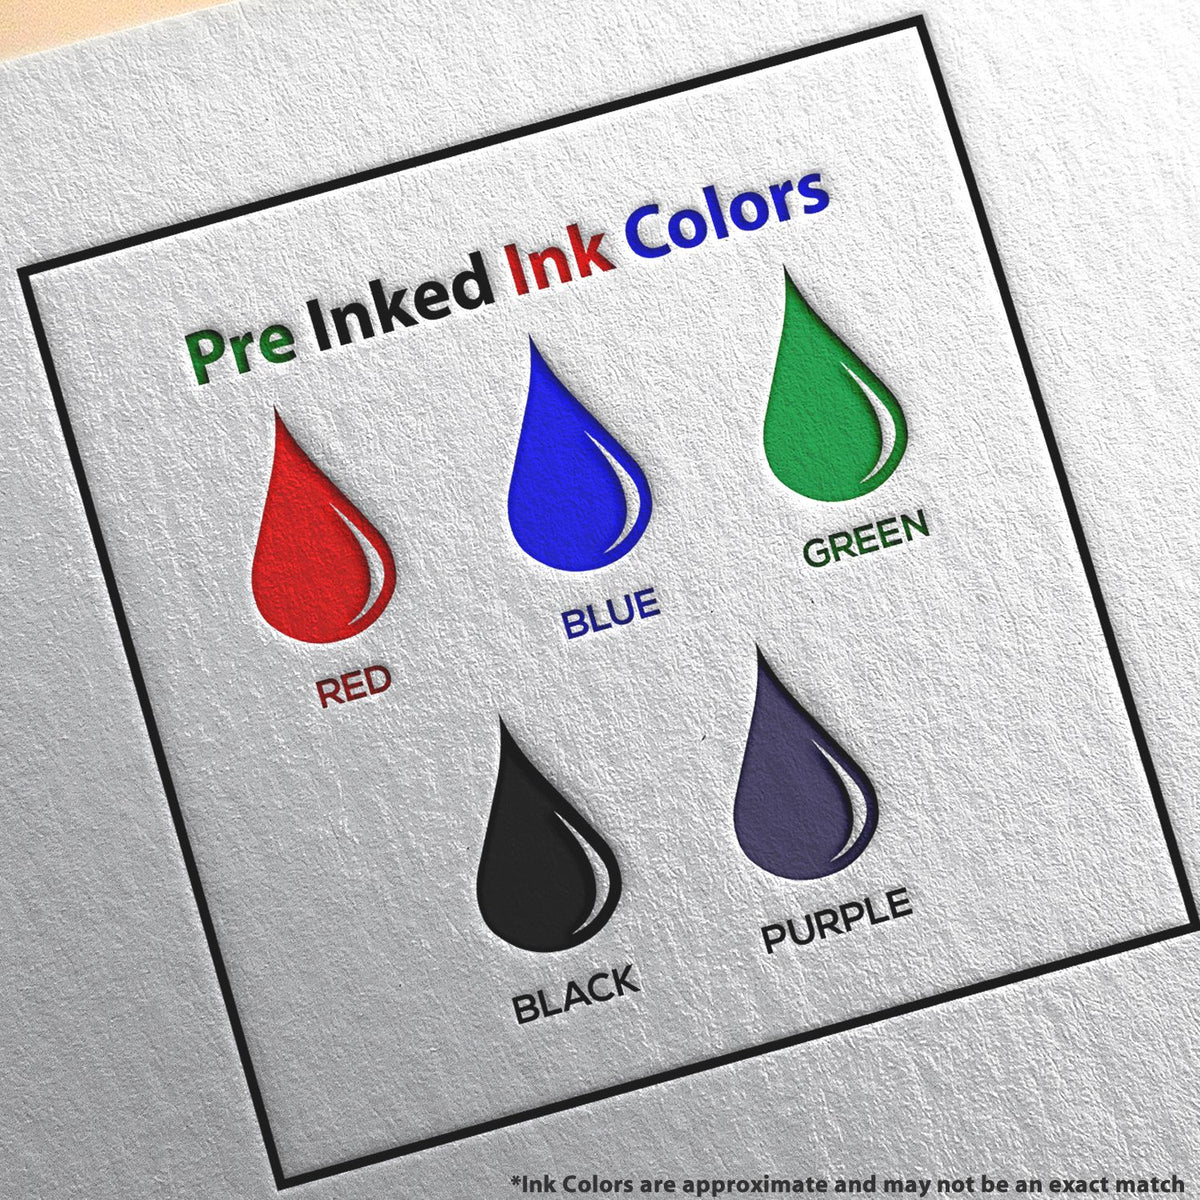 A picture showing the different ink colors or hues available for the Premium MaxLight Pre-Inked Arkansas Engineering Stamp product.